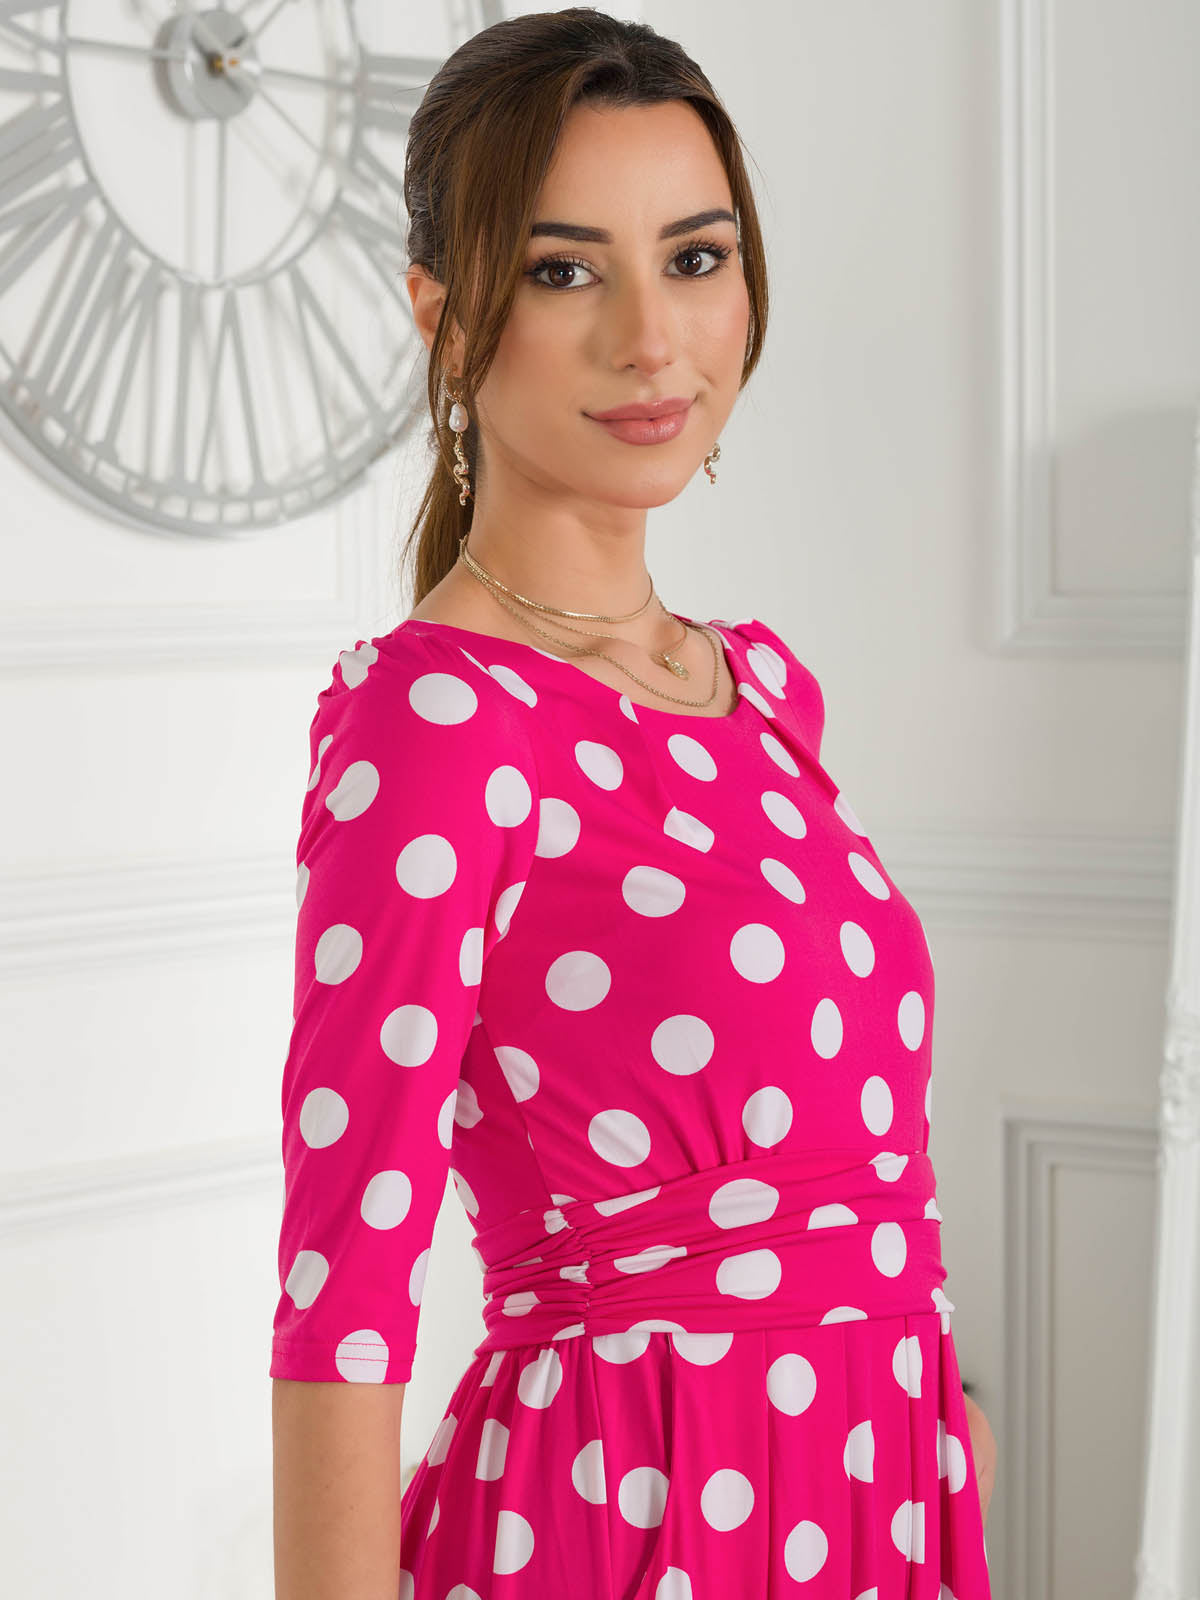 Holly Willoughby Pink Polka Dot Dress March 2021 – Fashion You Really Want